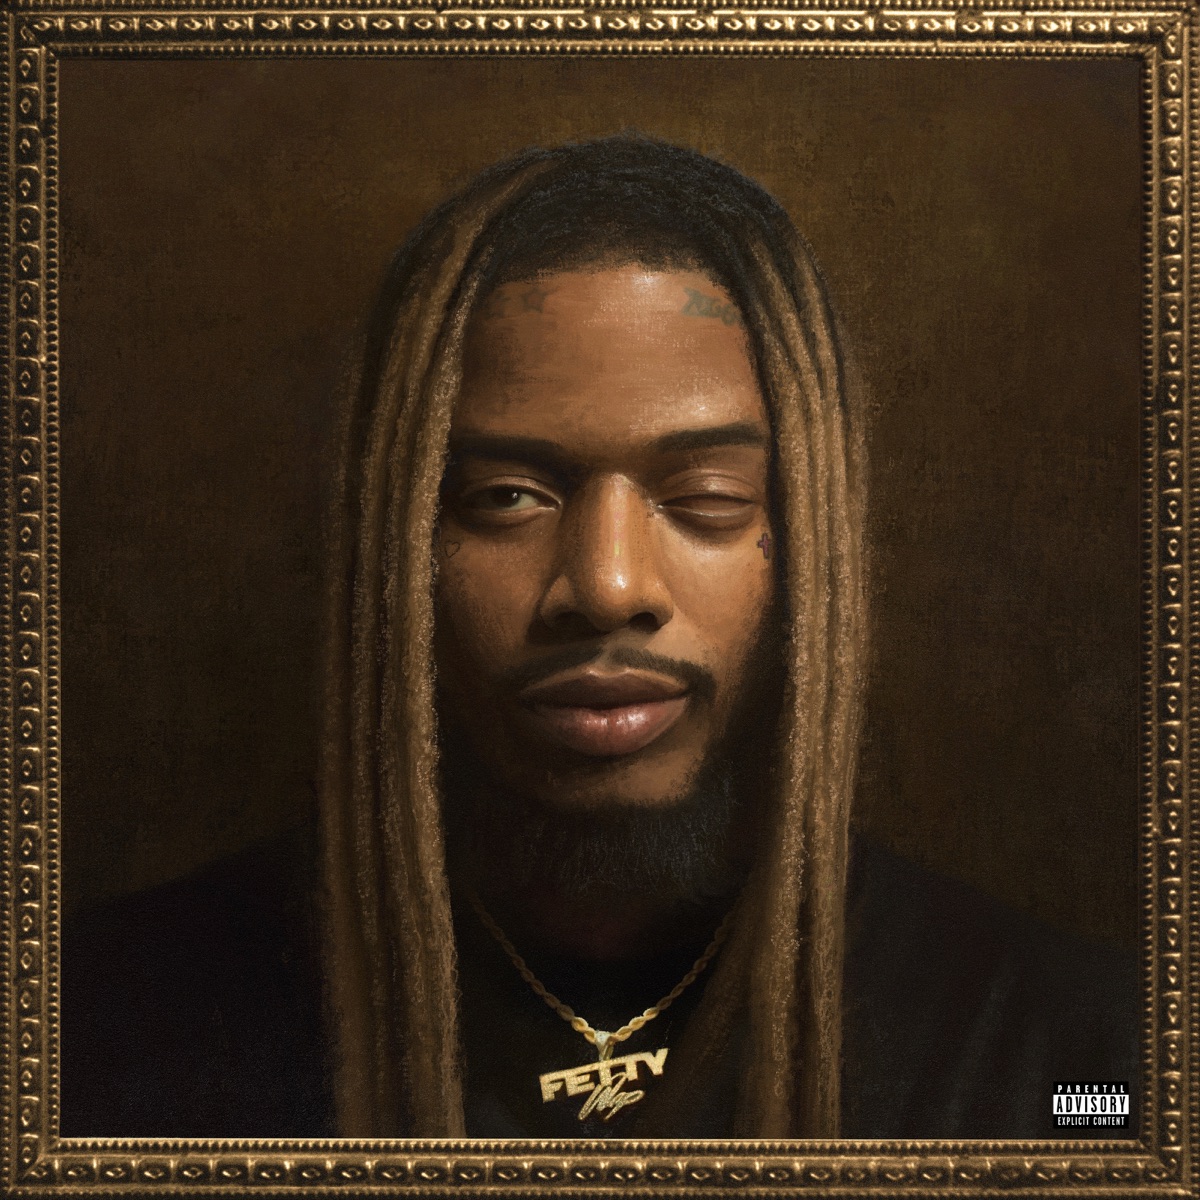 With his career truly taking off after the 2015 release of his self-titled debut album, “Fetty Wap,” two albums later landing us at “King Zoo,” we can truly observe the growth of this R&B/rap fusion genius. 